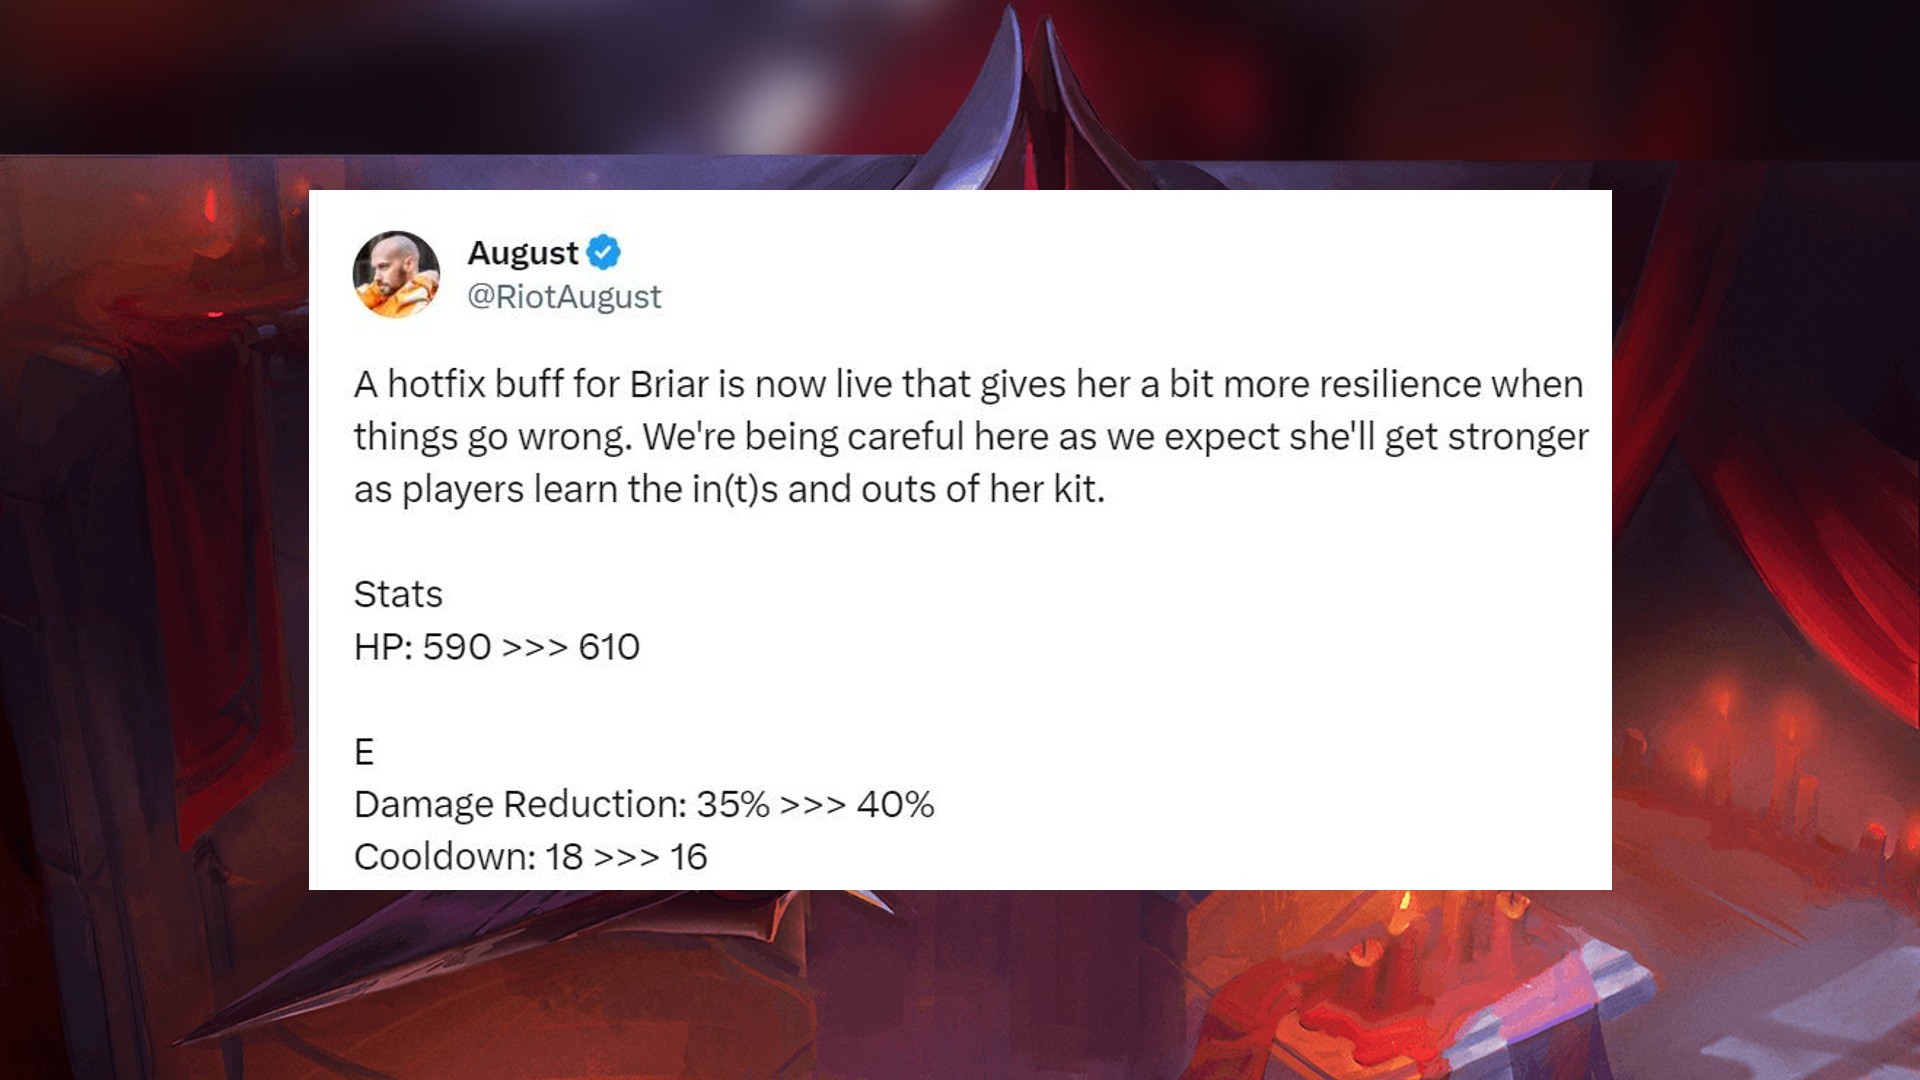 League of Legends: Emergency Buffs for Briar After Poor Win Rate